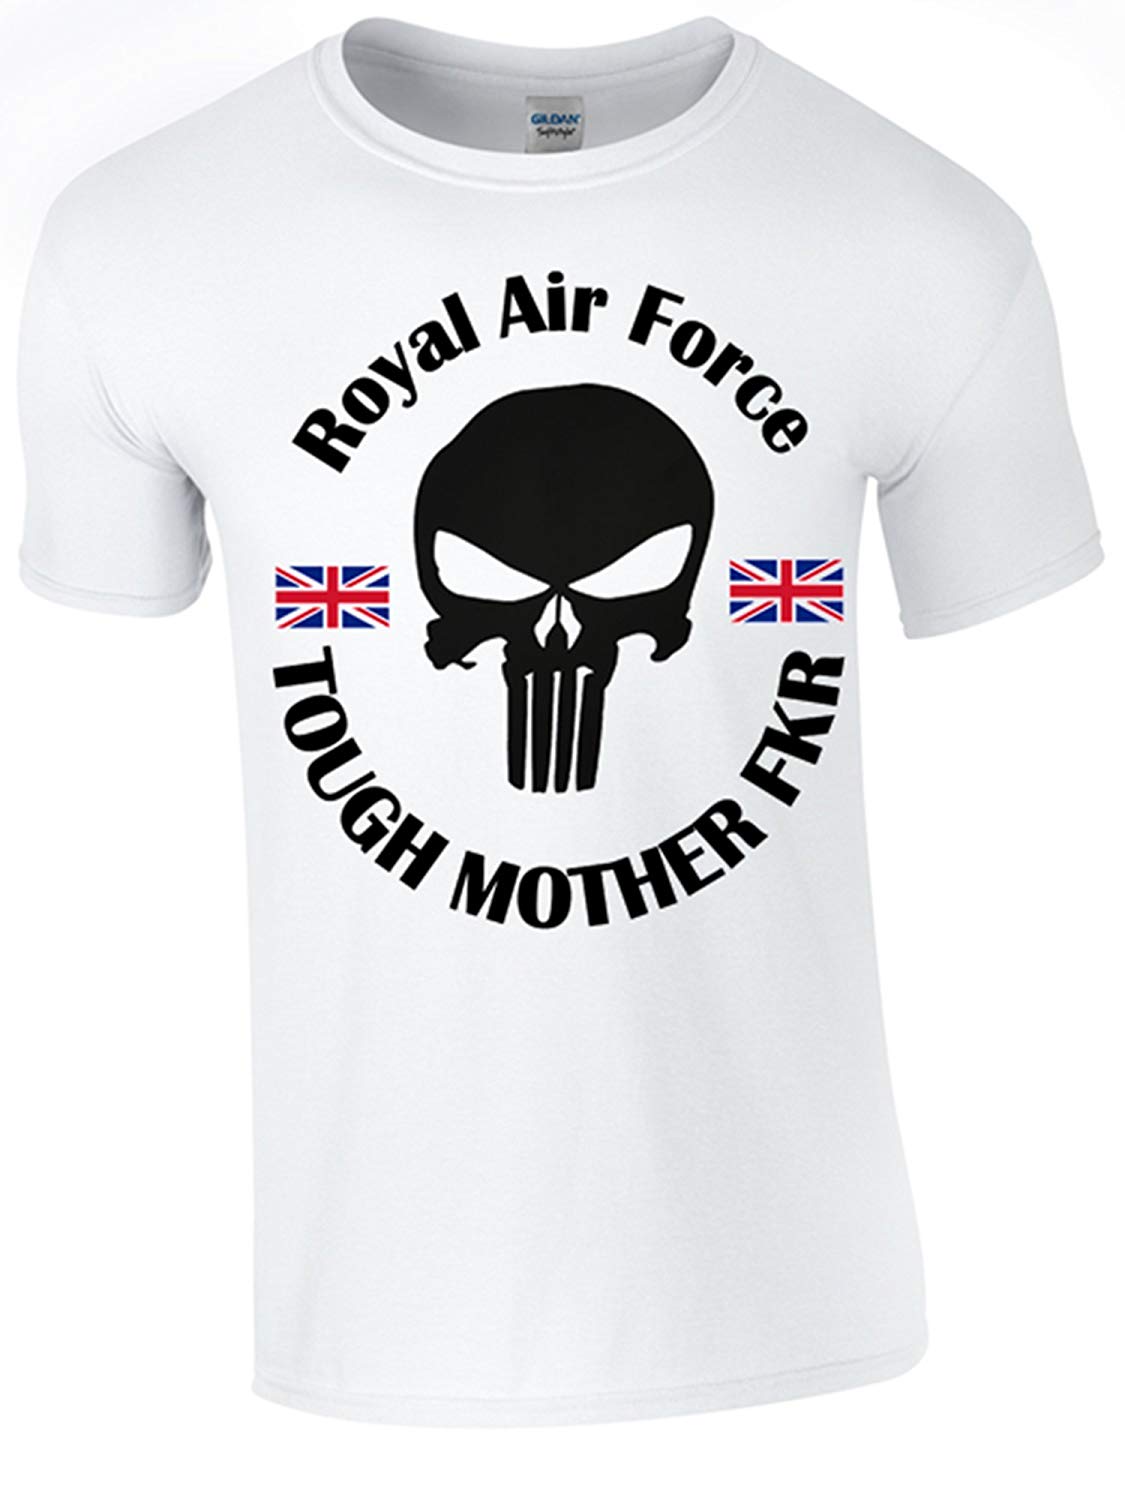 Royal Air Force TMF T-Shirt - Army 1157 kit White / XL Army 1157 Kit Veterans Owned Business